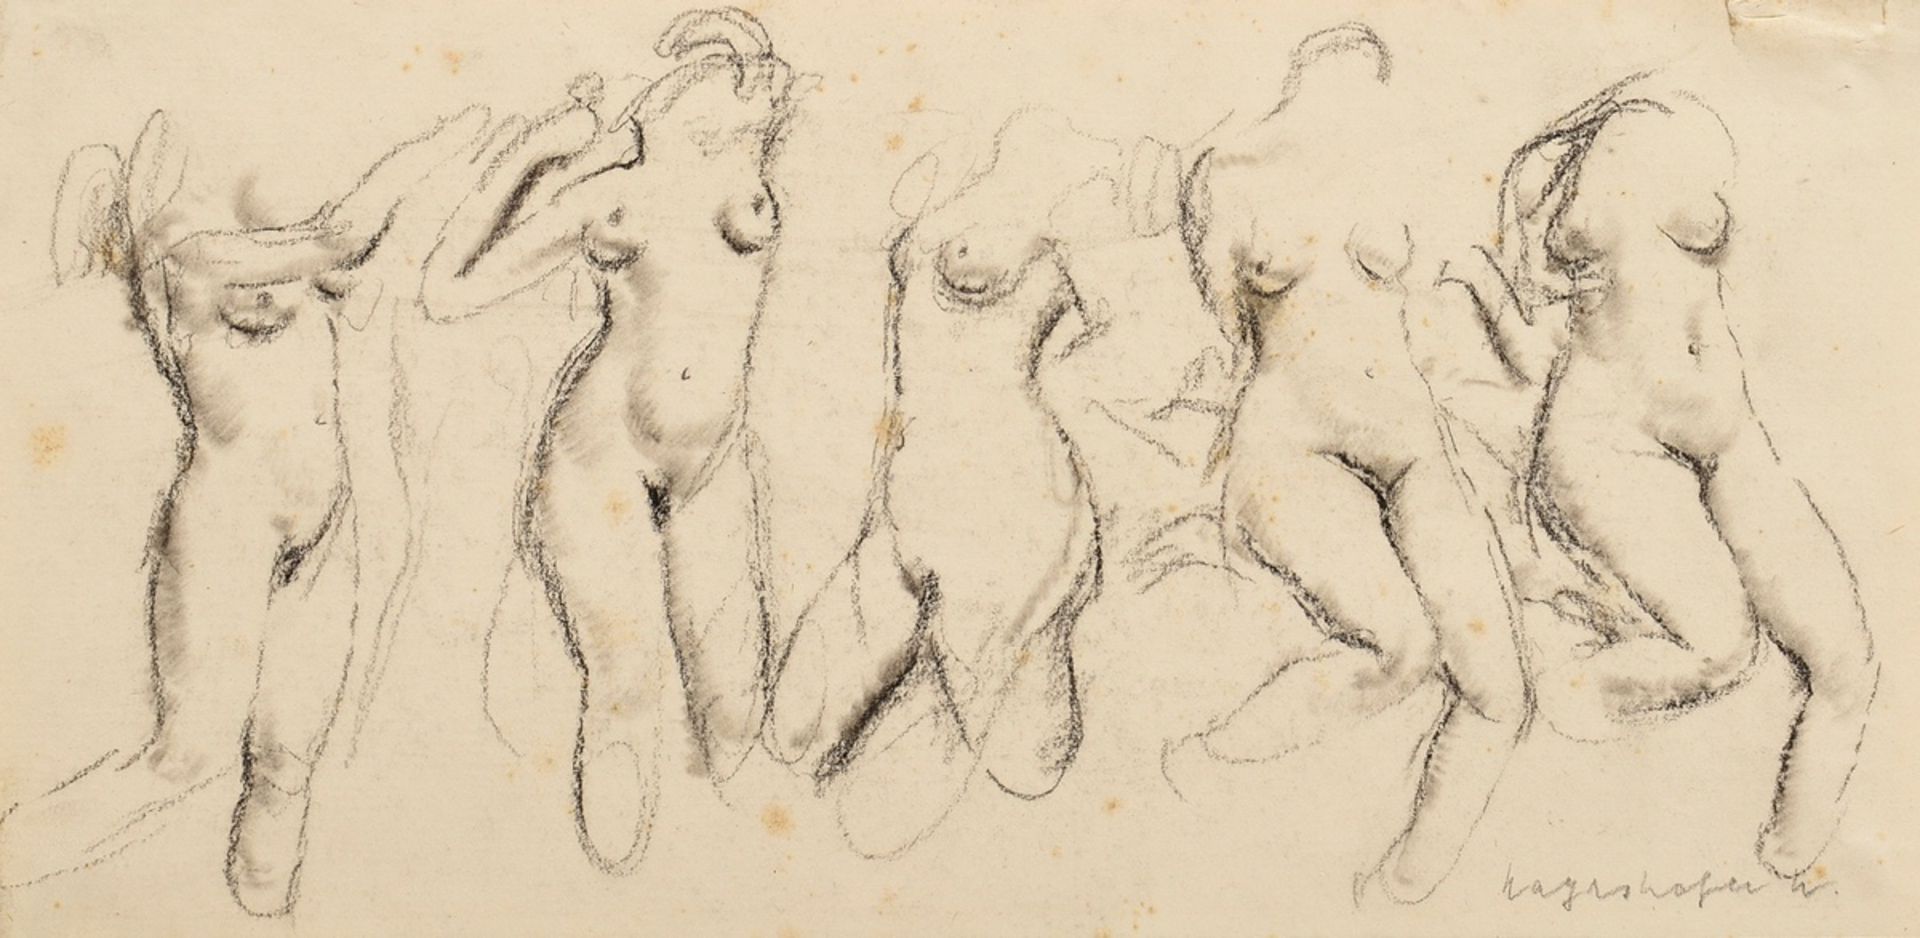 17 Mayershofer, Max (1875-1950) "Female nude drawings", charcoal, each sign., each mounted in passe - Image 10 of 19